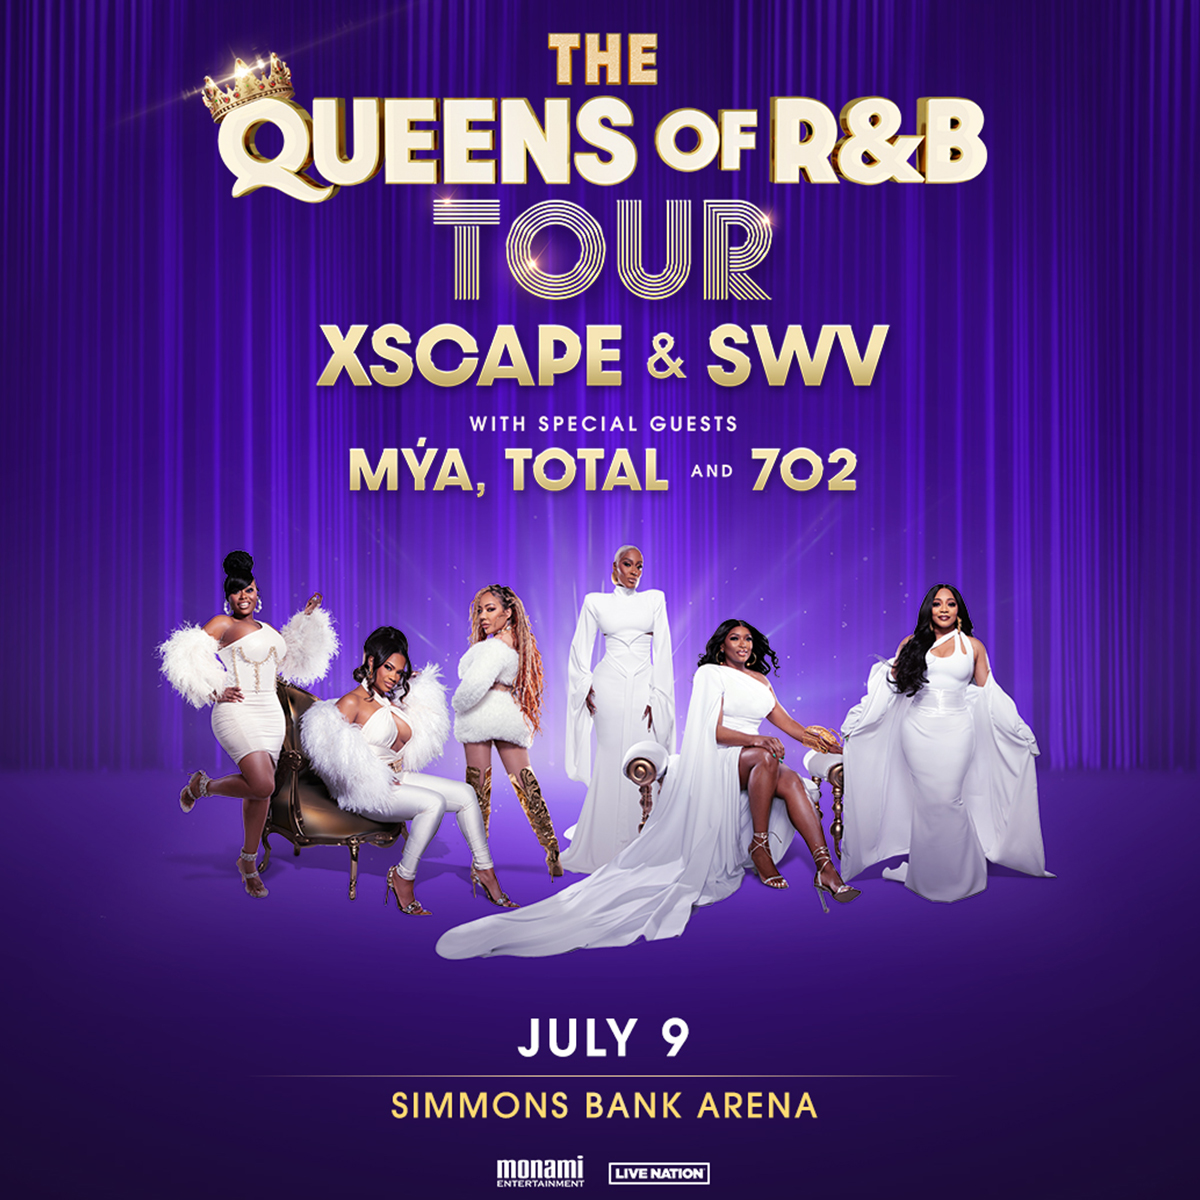 Sing it, Ladies! 🤩🎤 XSCAPE and SWV are bringing THE QUEENS OF R&B TOUR to Simmons Bank Arena on July 9th with special guests Mýa, Total and 702! Grab your seats today - bit.ly/4cx8vfq